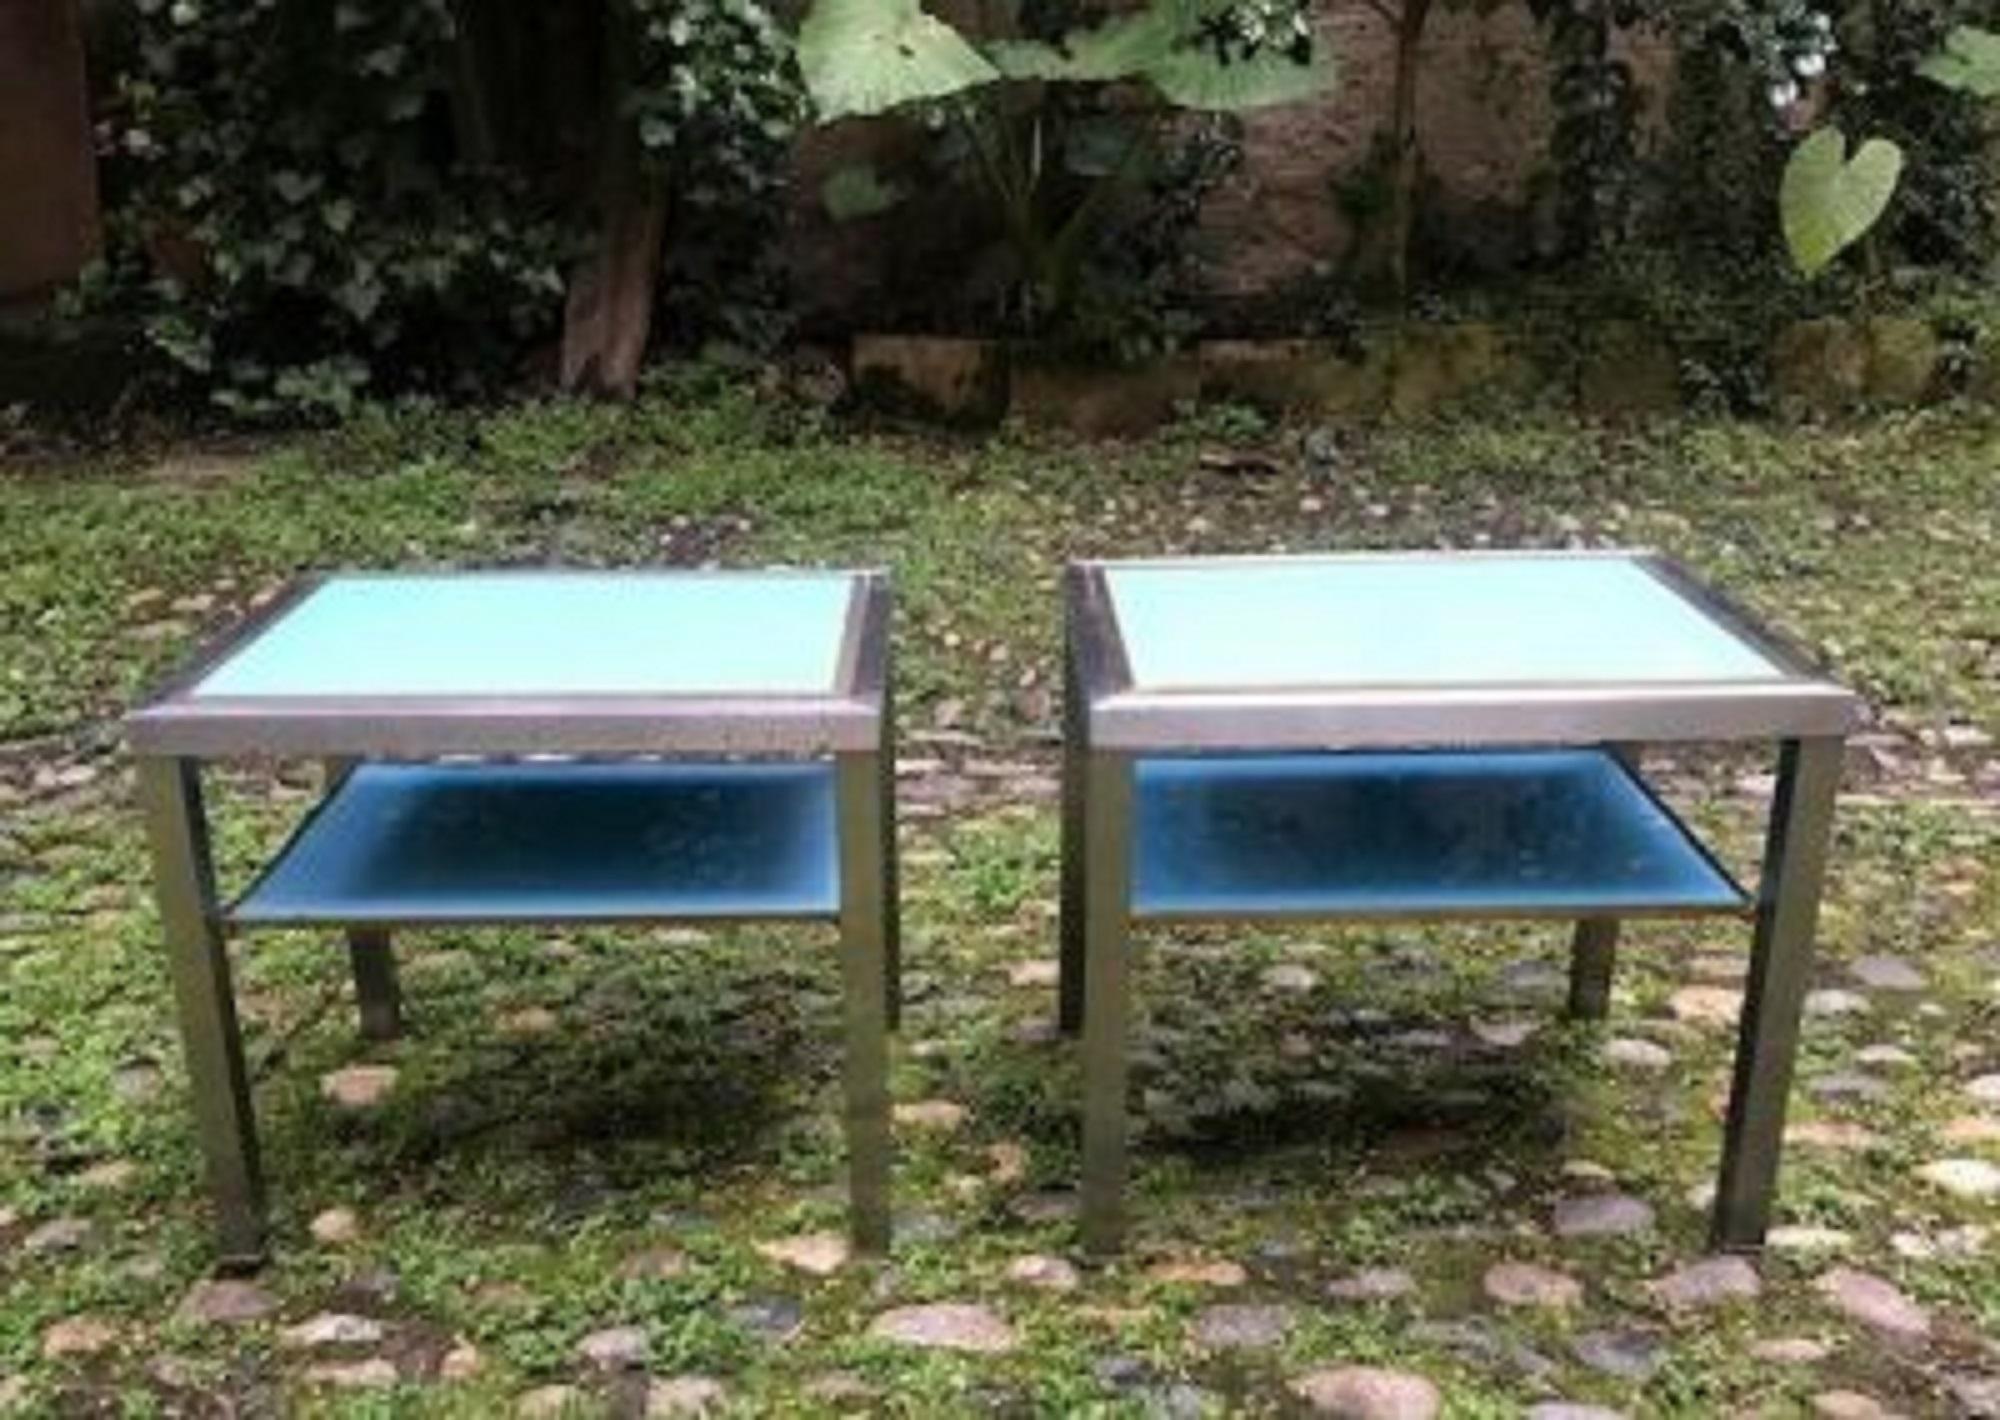 Pair of side tables in steel and brass
Two turquoise blue glass trays
Model by Guy Lefèvre for the Jansen house

Guy Lefèvre is a French designer who works on furniture like goldsmiths. … The design of the small piece of furniture is